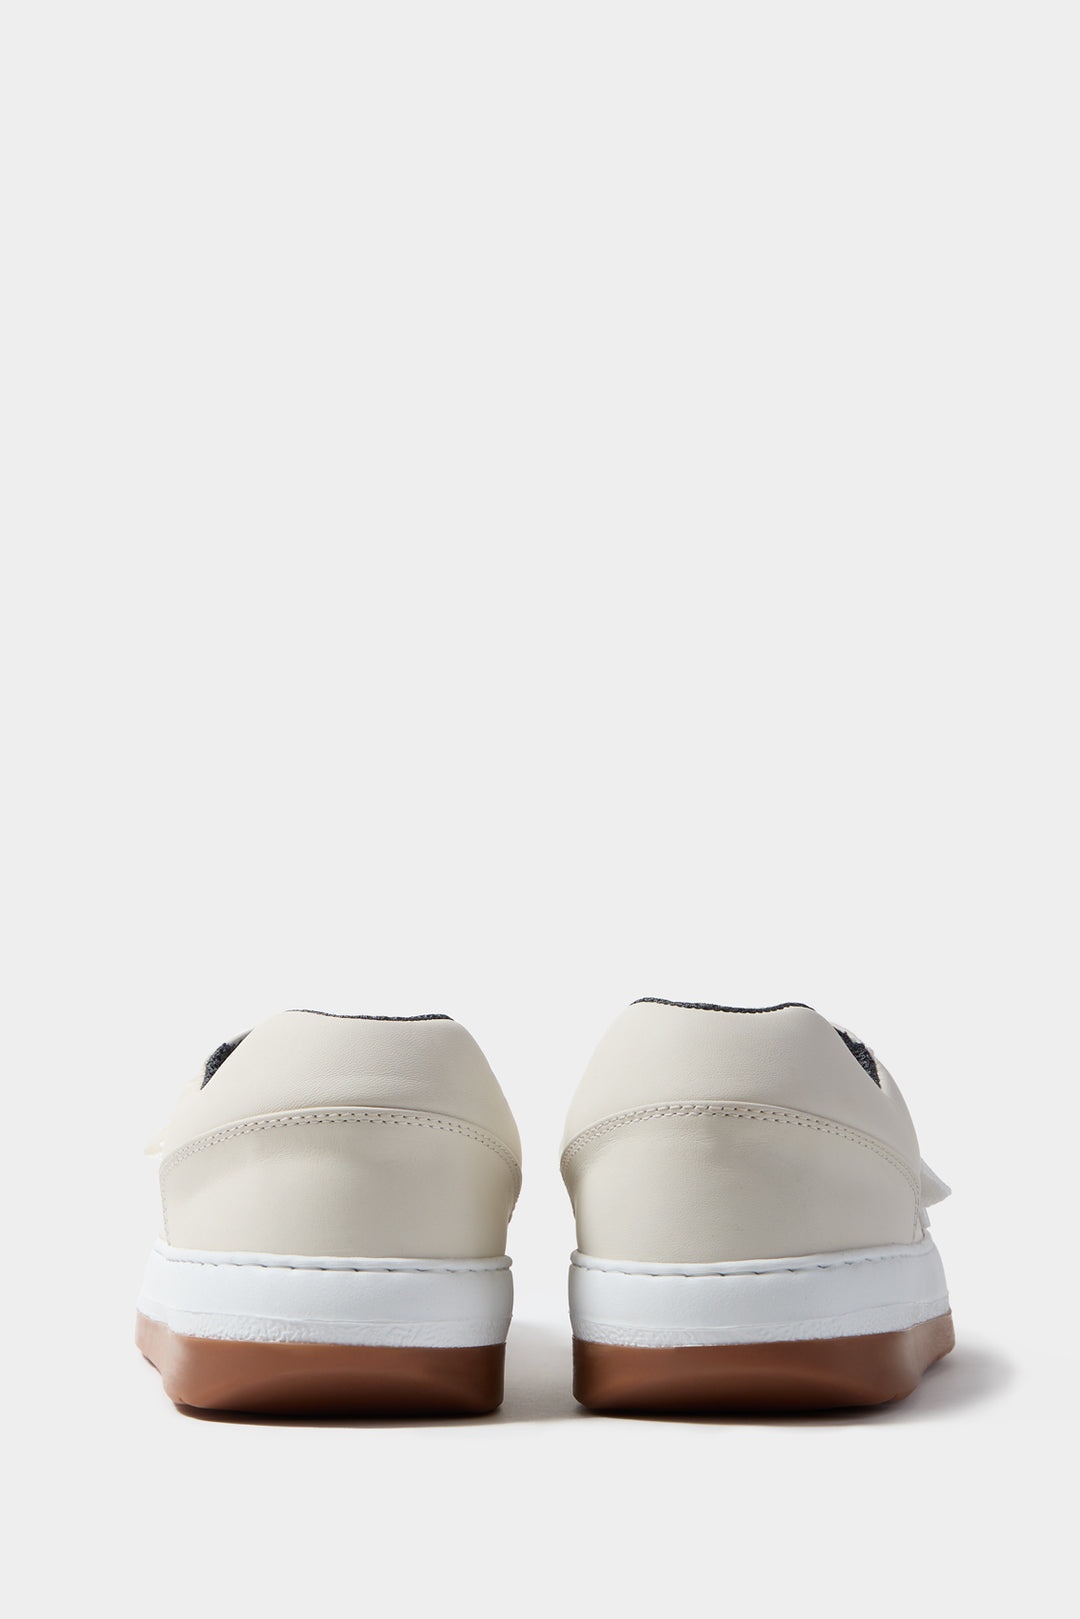 DREAMY SHOES / leather / white - 3